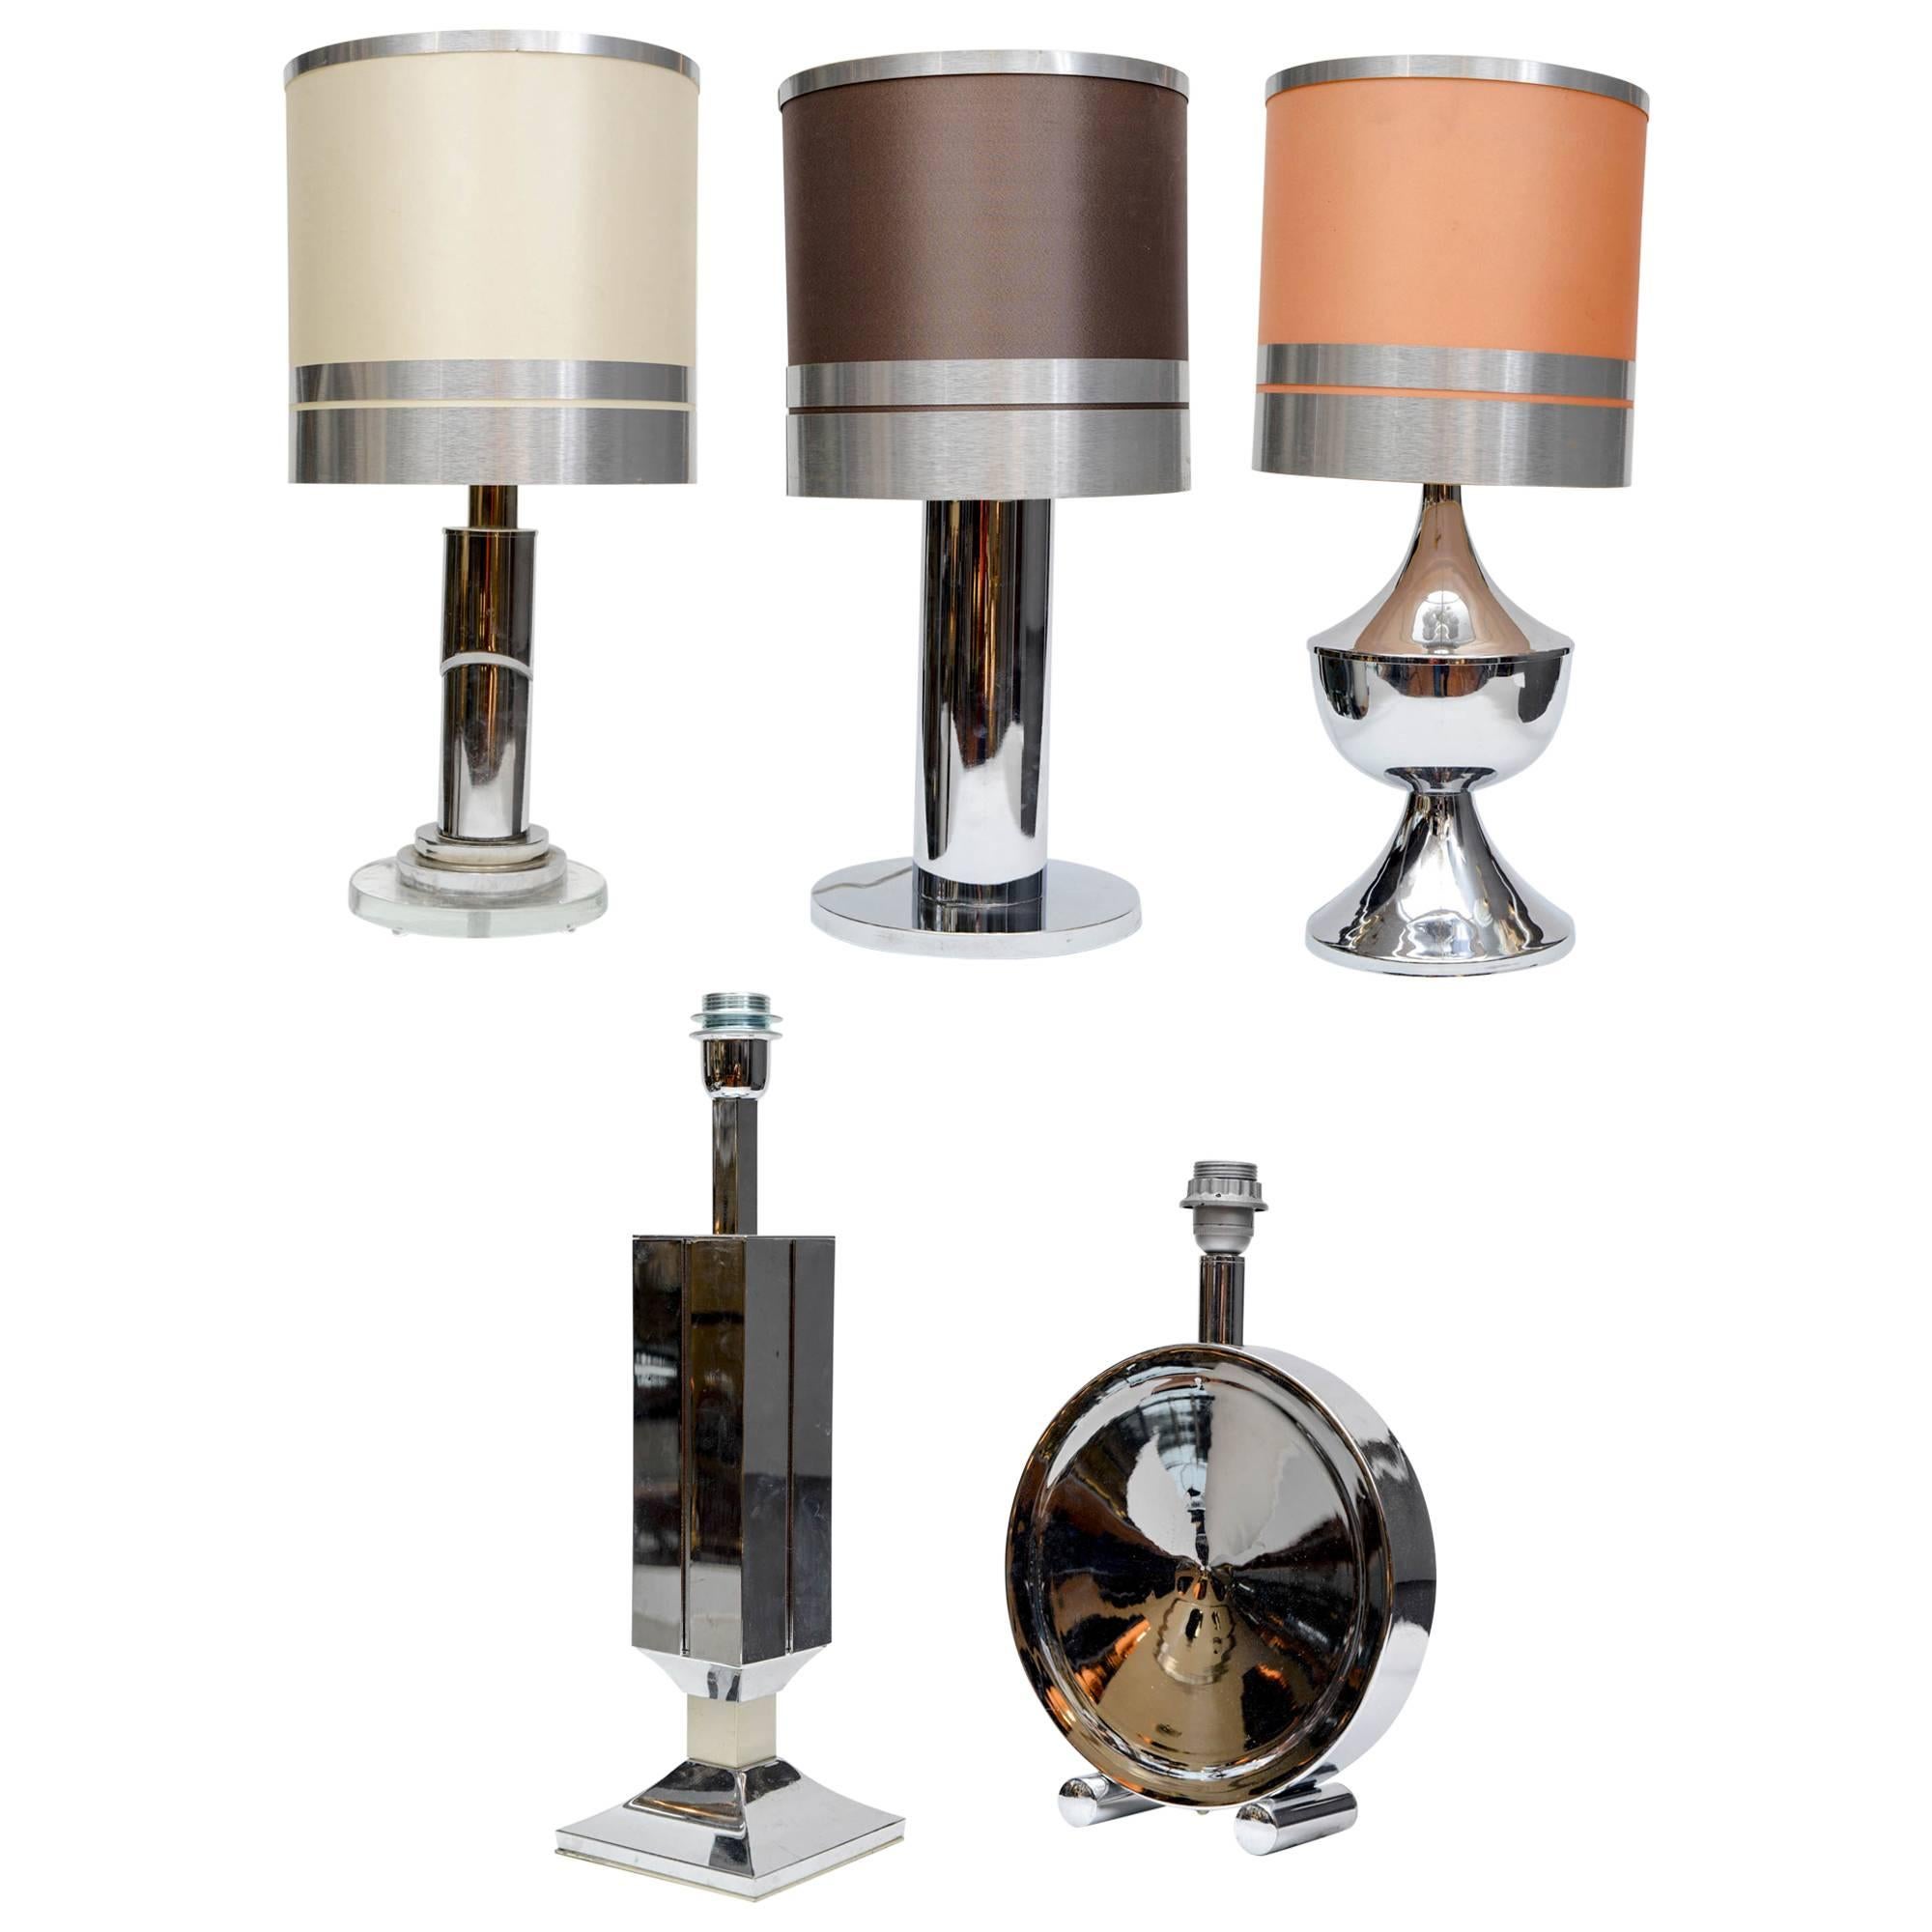 Eclectic Set of Five Different Stainless Steel Lamps with Original Shades